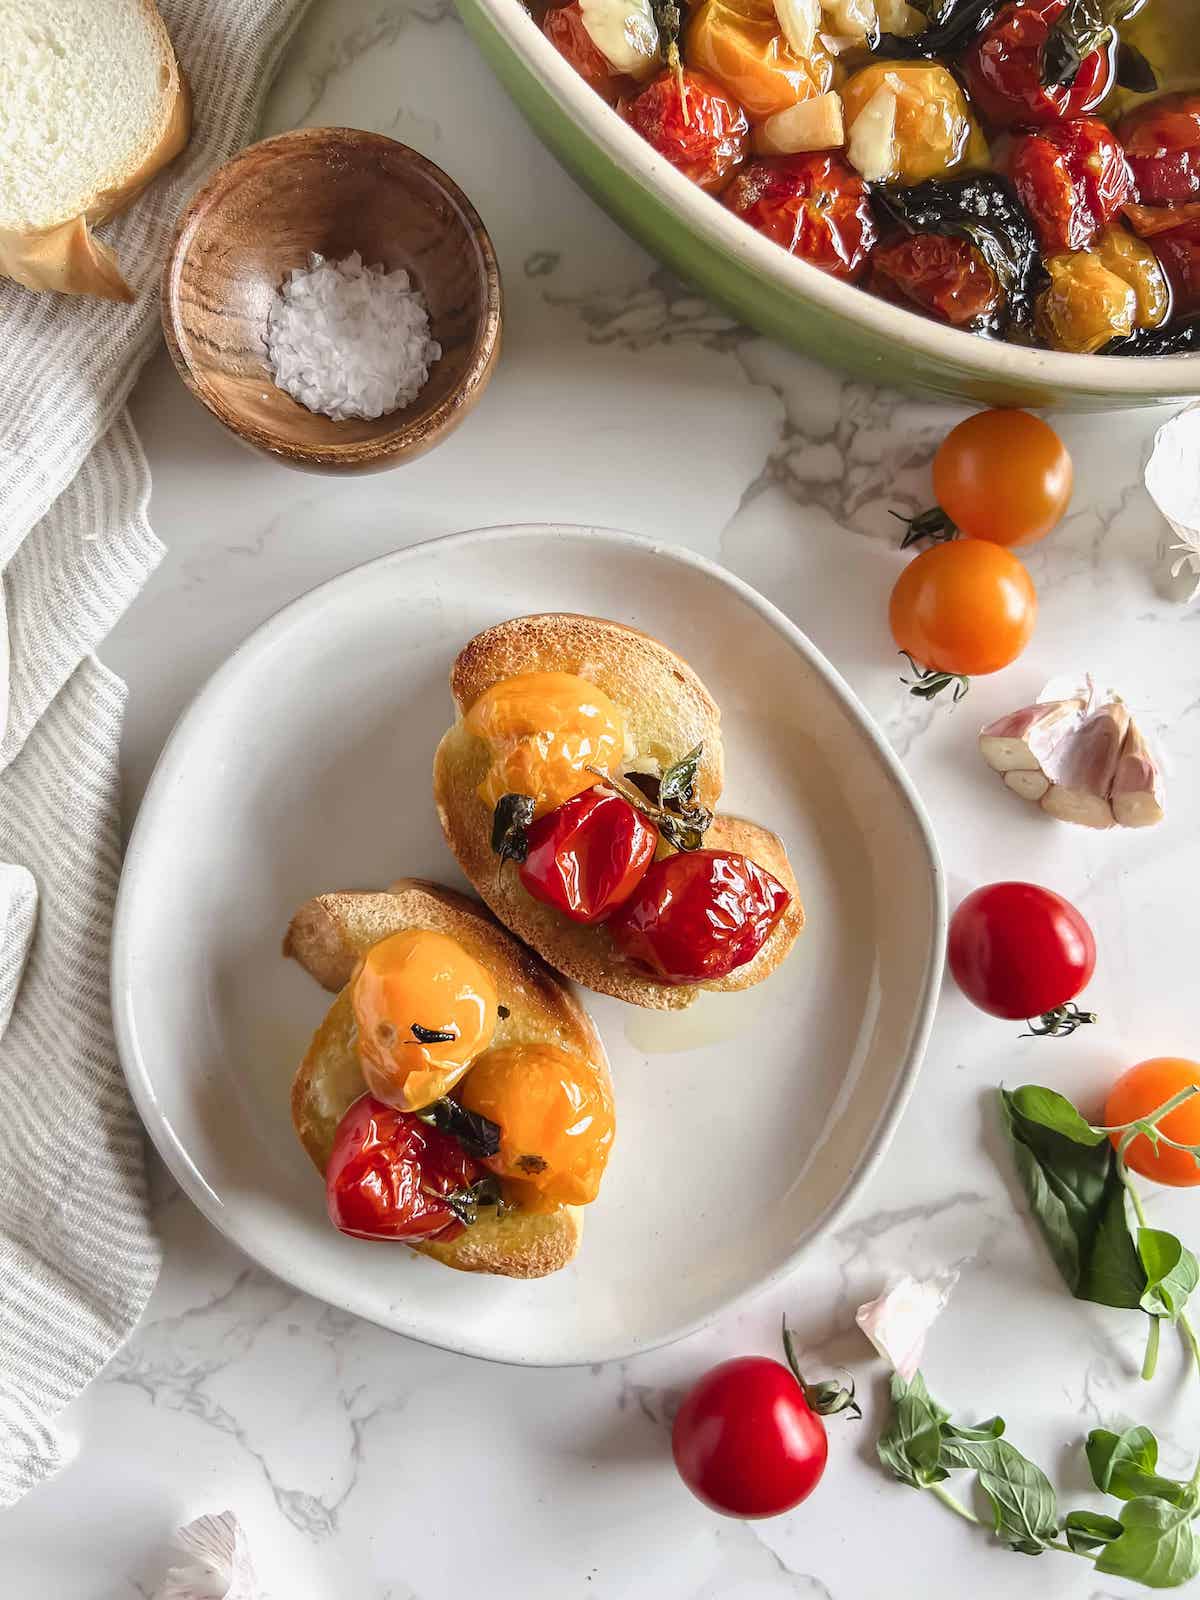 Small plate with two pieces of french bread topped with cherry tomato and garlic confit.